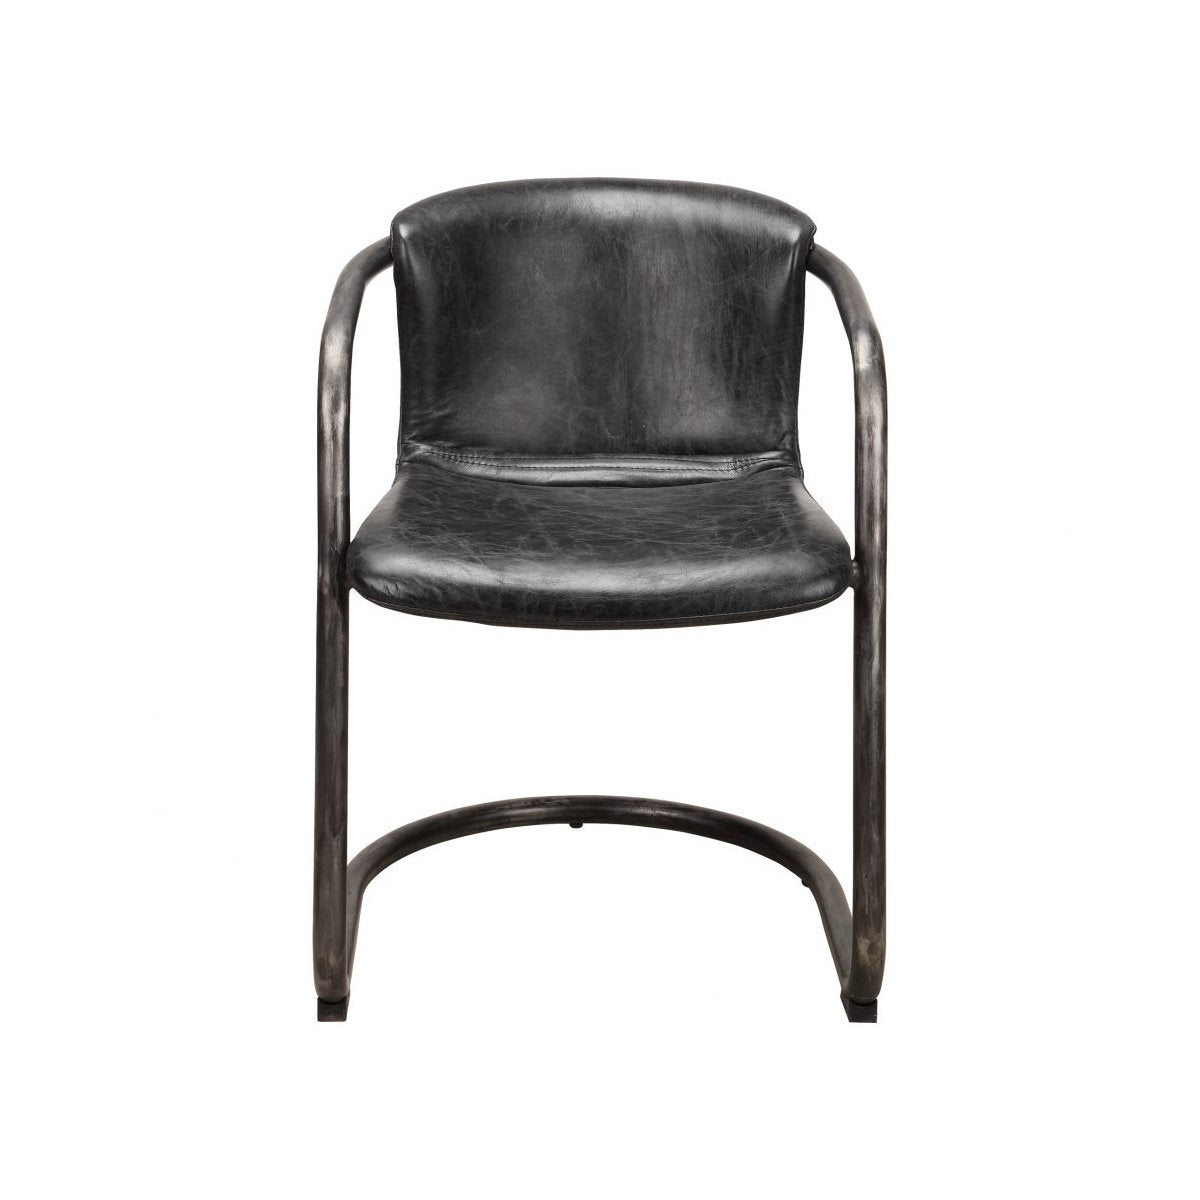 Load image into Gallery viewer, Freeman Dining Chair-M2 BlackDining Chairs Moe&amp;#39;s  Black   Four Hands, Burke Decor, Mid Century Modern Furniture, Old Bones Furniture Company, Old Bones Co, Modern Mid Century, Designer Furniture, https://www.oldbonesco.com/
